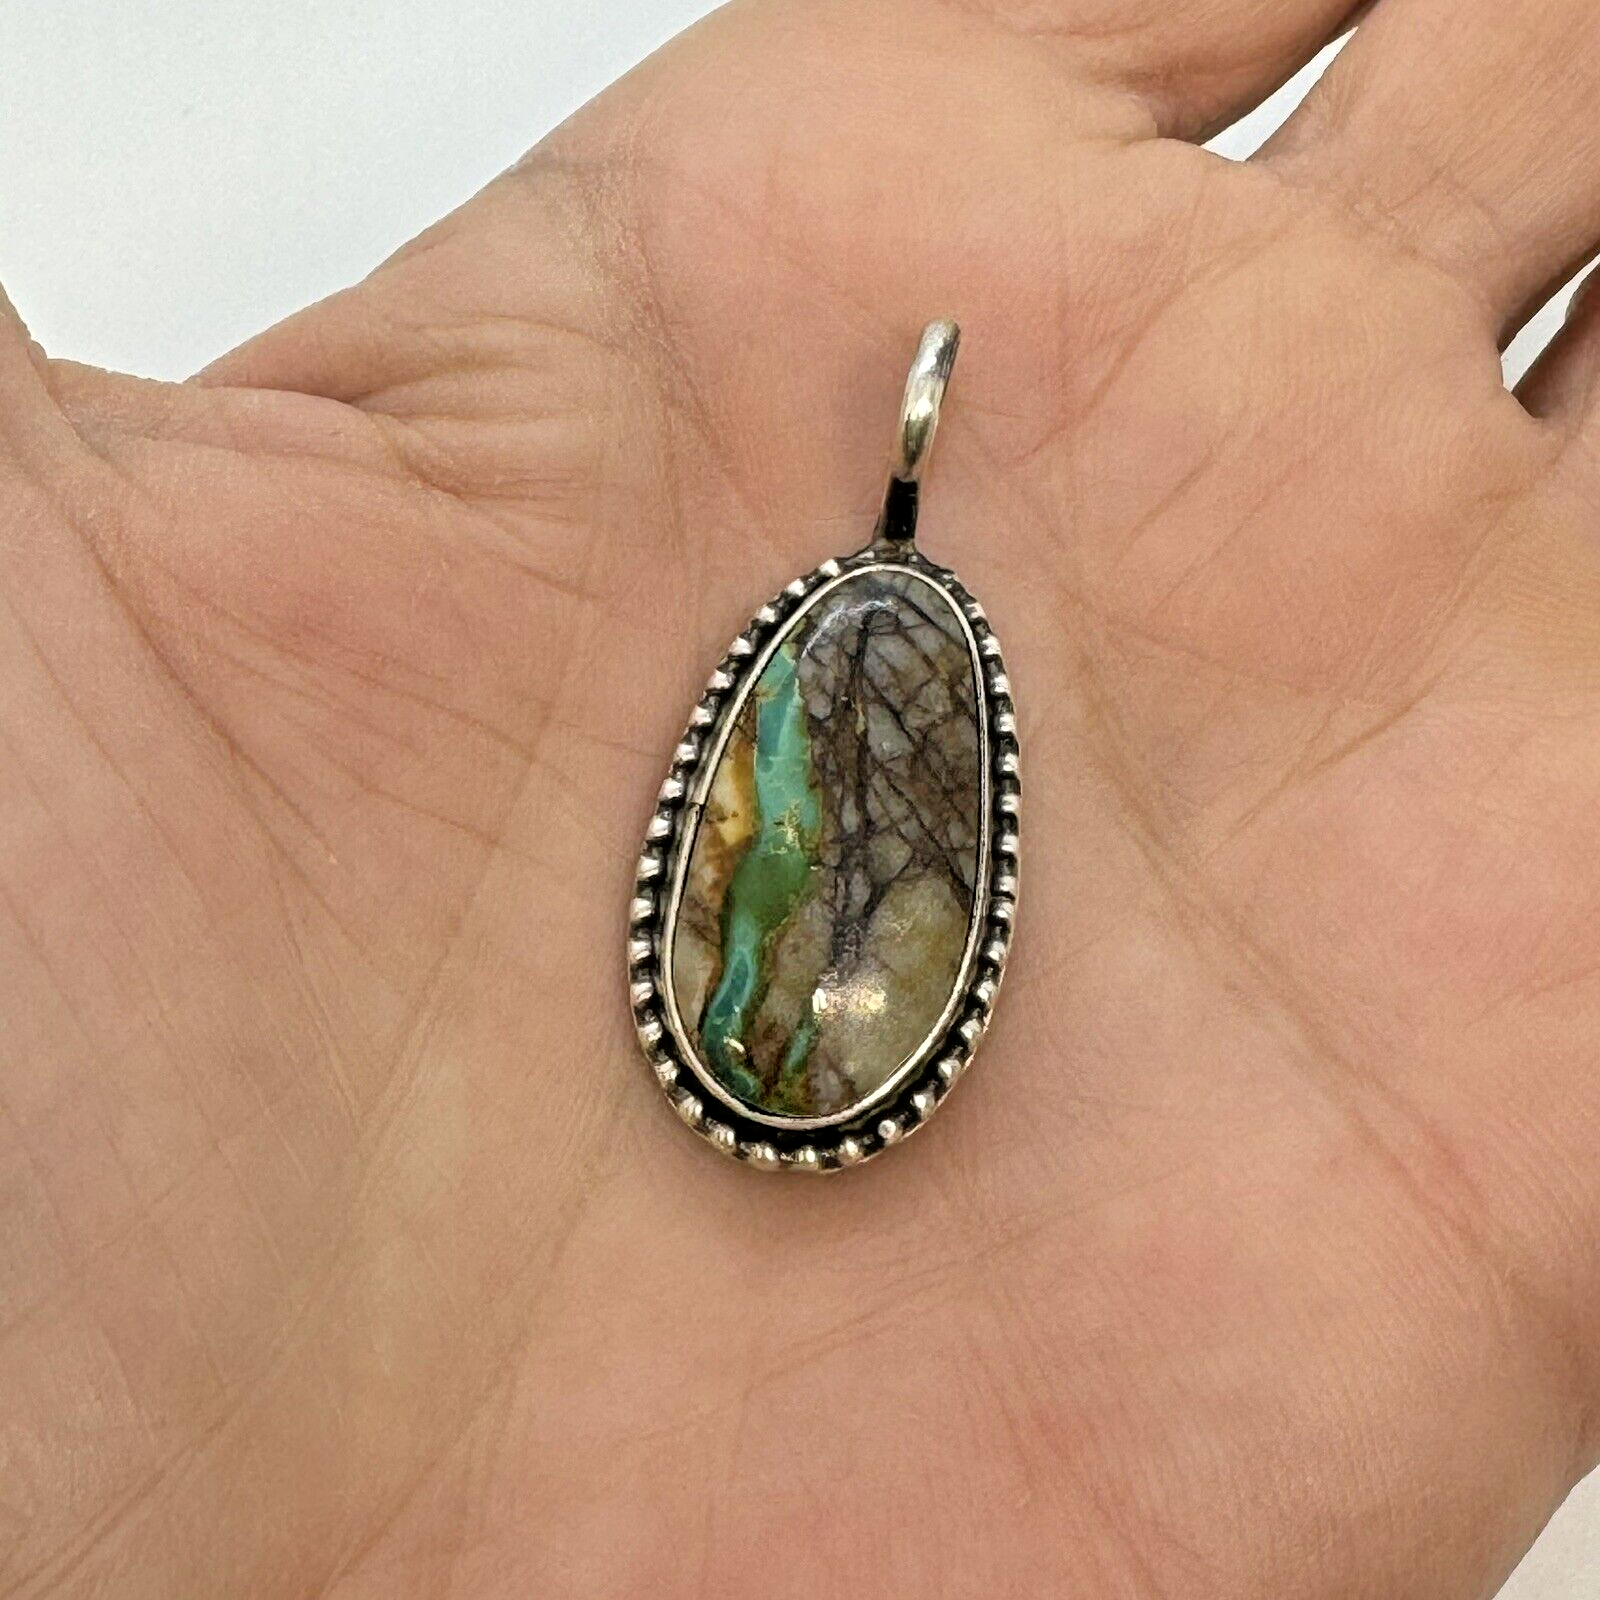 Navajo Natural Ribbon Turquoise Pendant Sterling Silver 7.2g by Anderson Largo Native American - фотография #4